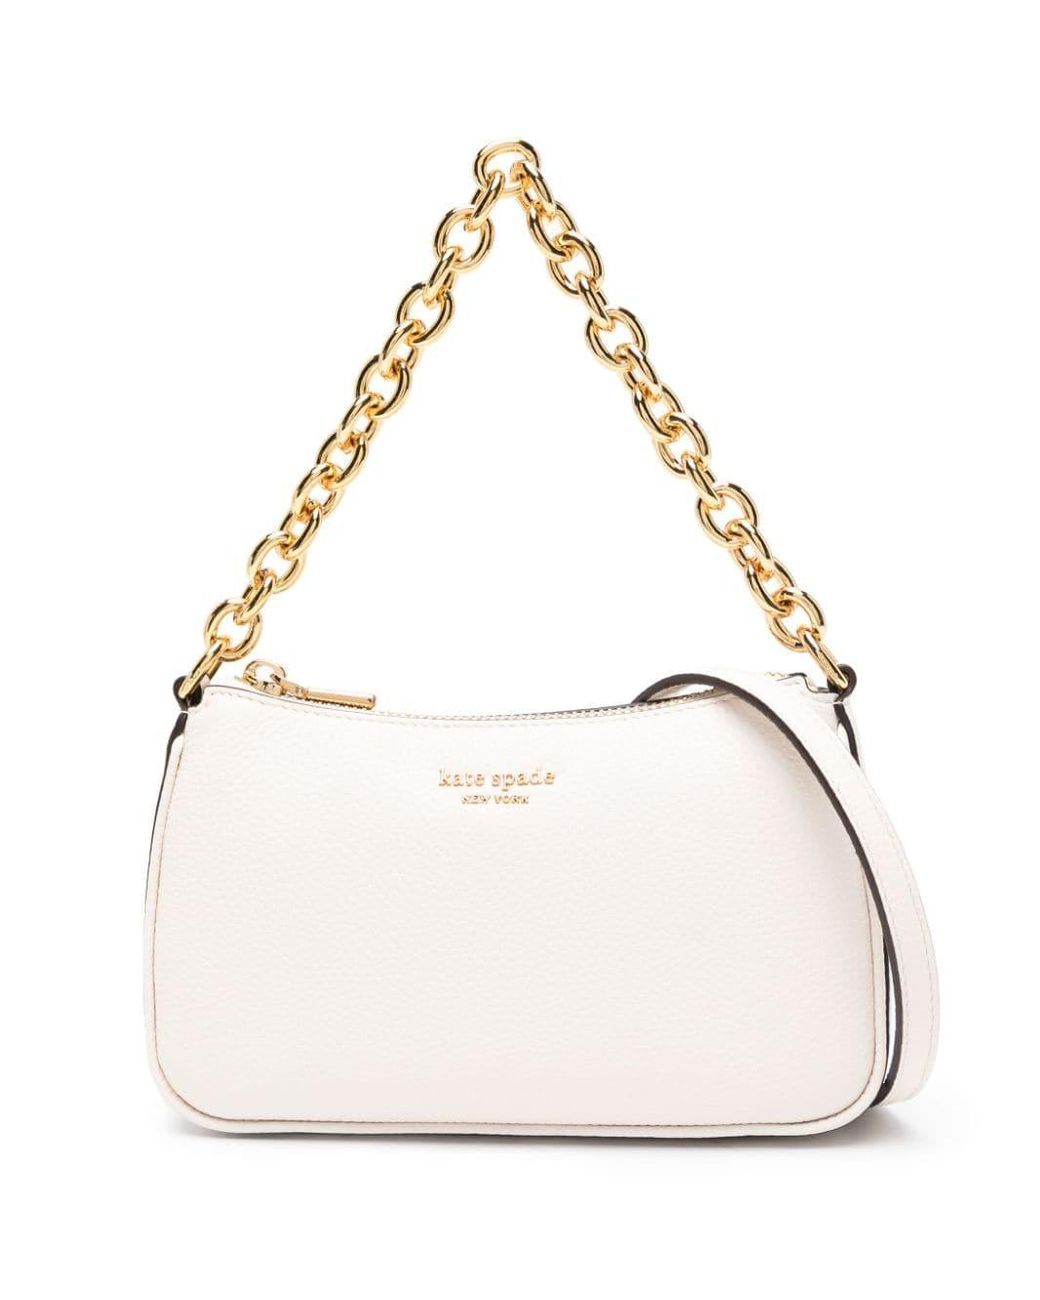 Kate Spade Small Jolie Leather Crossbody Bag in Natural | Lyst